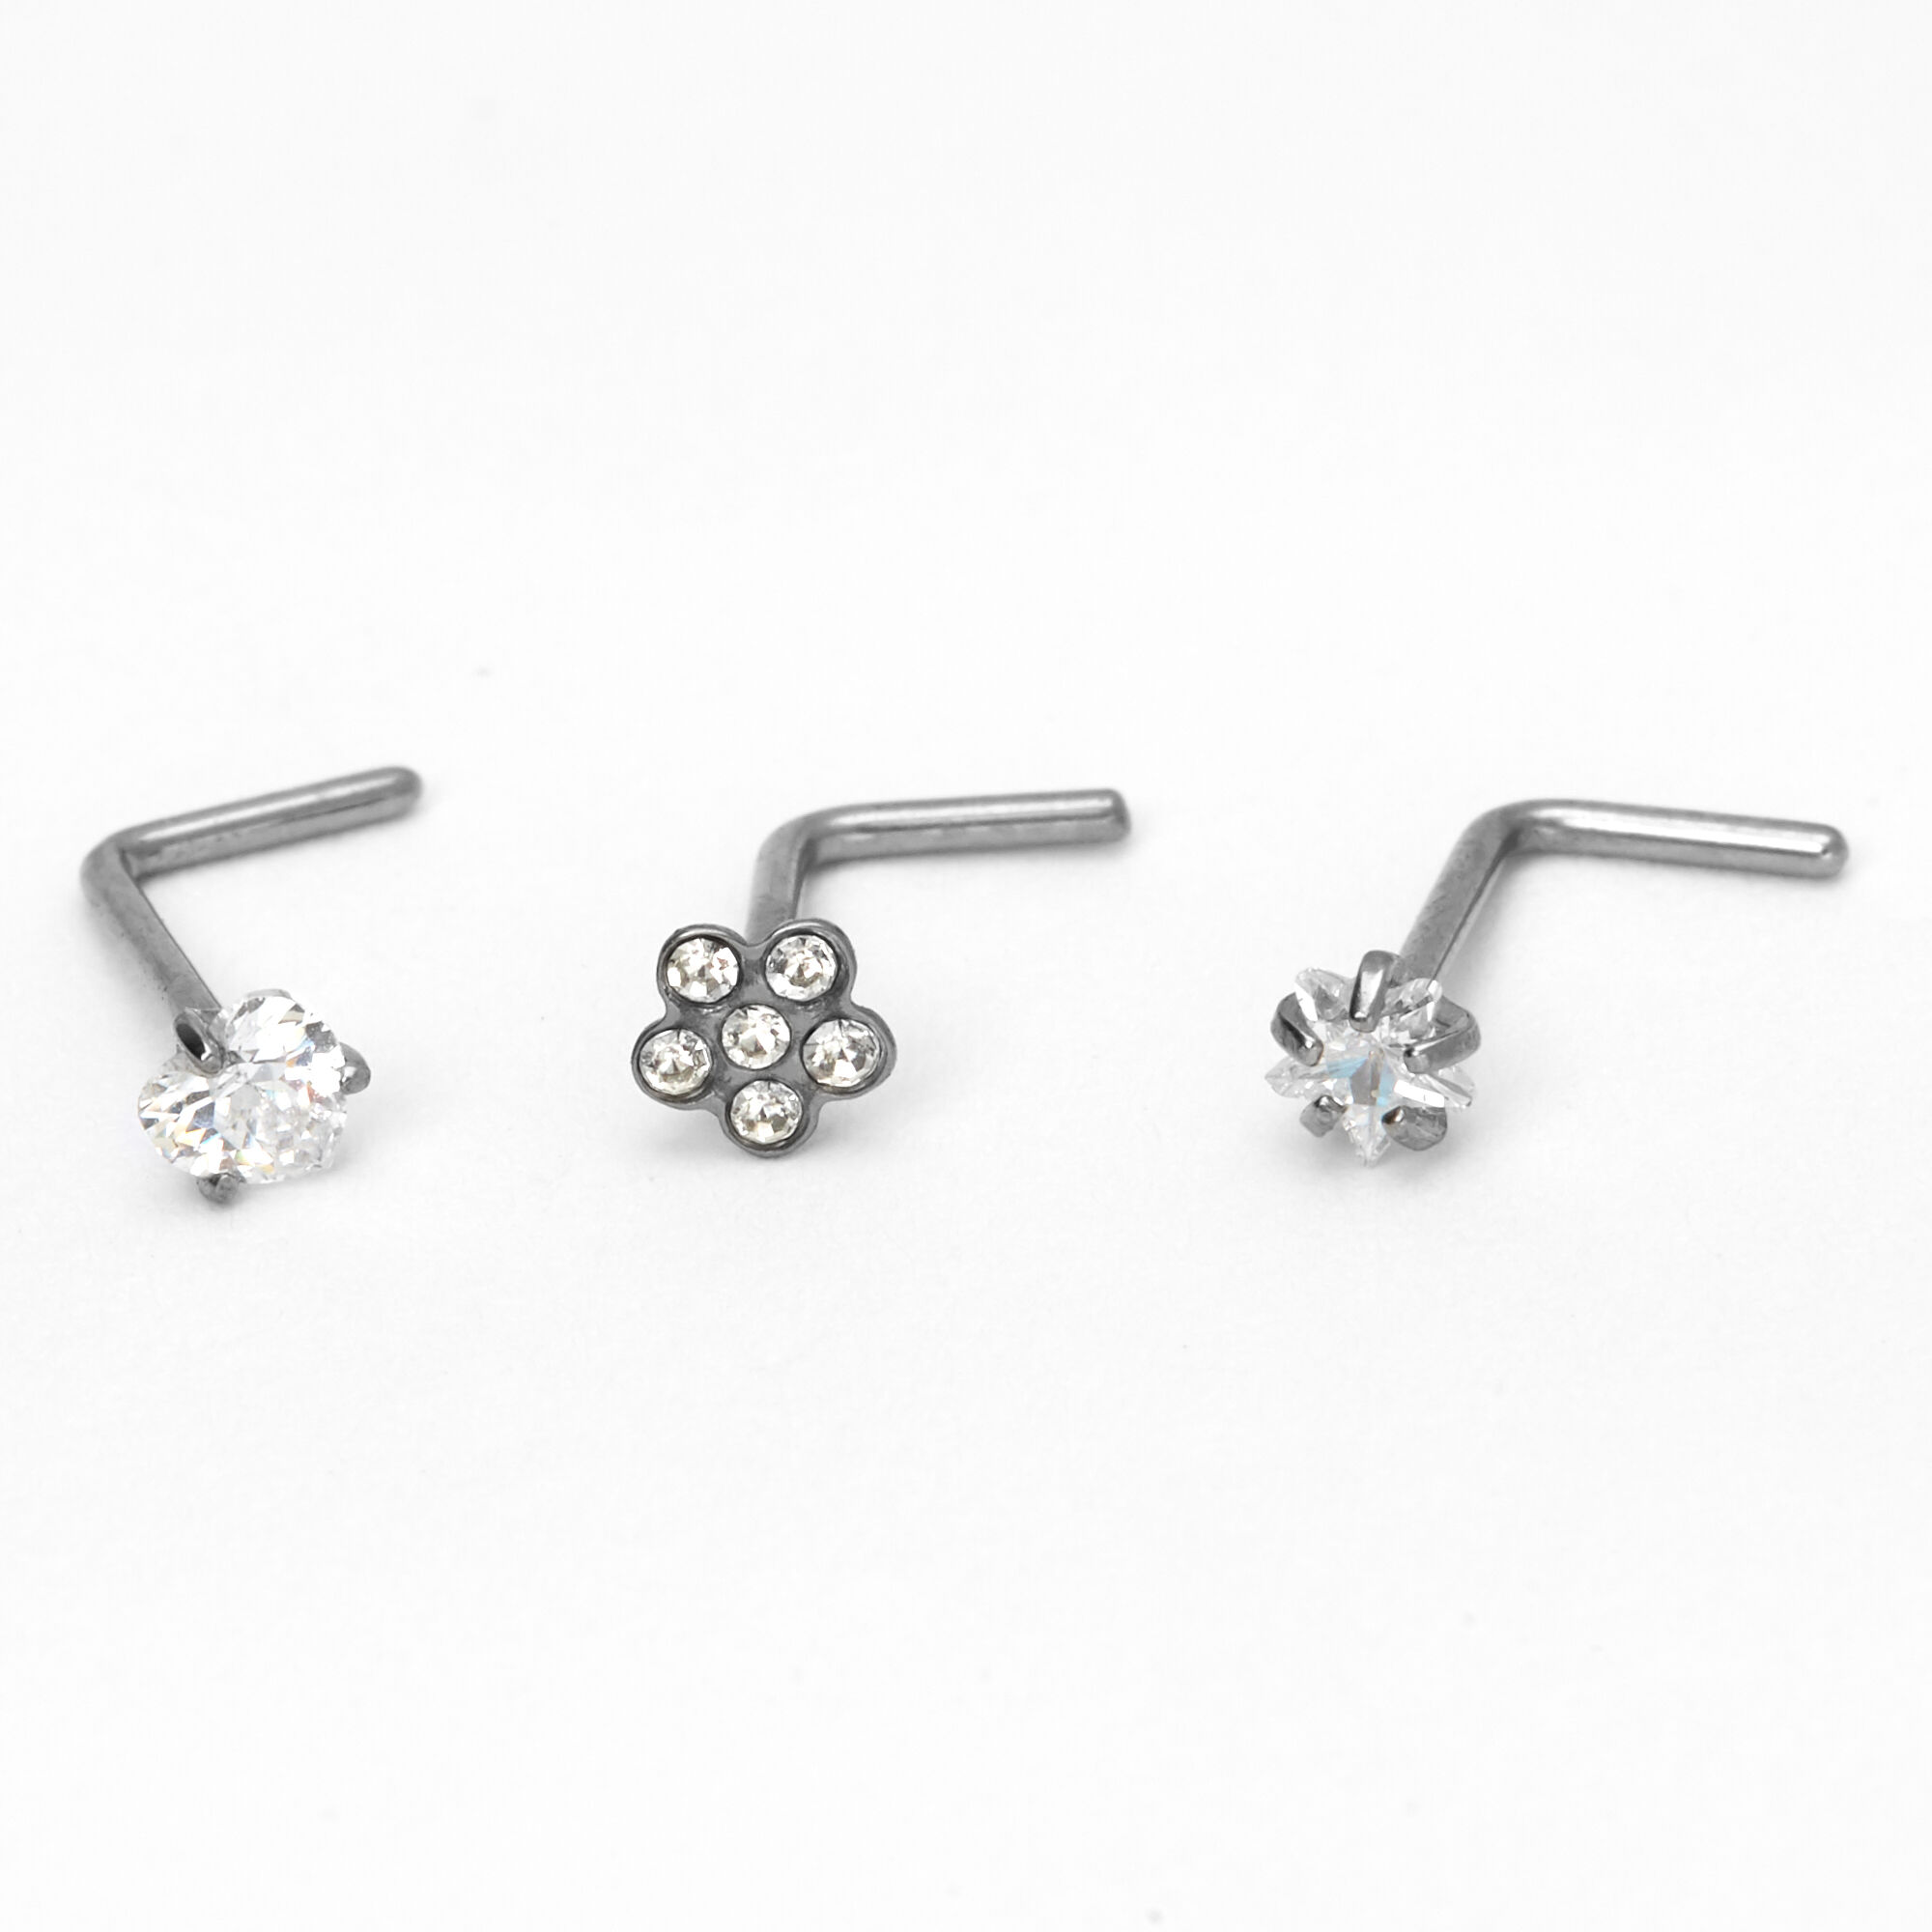 View Claires Titanium 20G Flower Heart Star Nose Studs 3 Pack Silver information